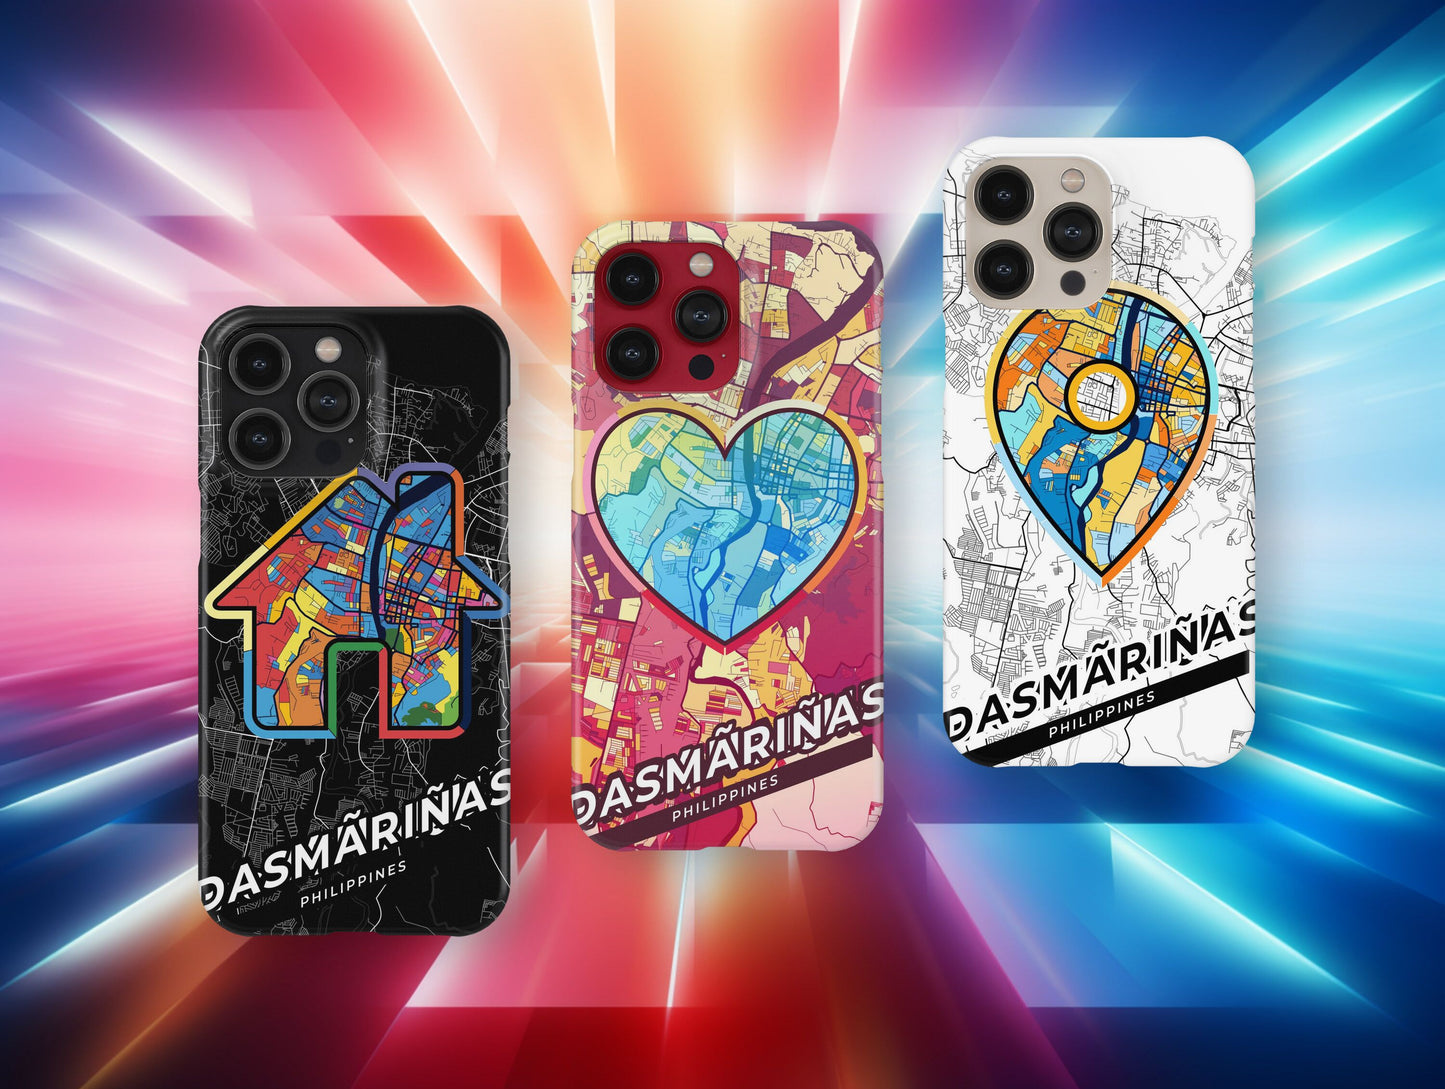 Dasmariñas Philippines slim phone case with colorful icon. Birthday, wedding or housewarming gift. Couple match cases.